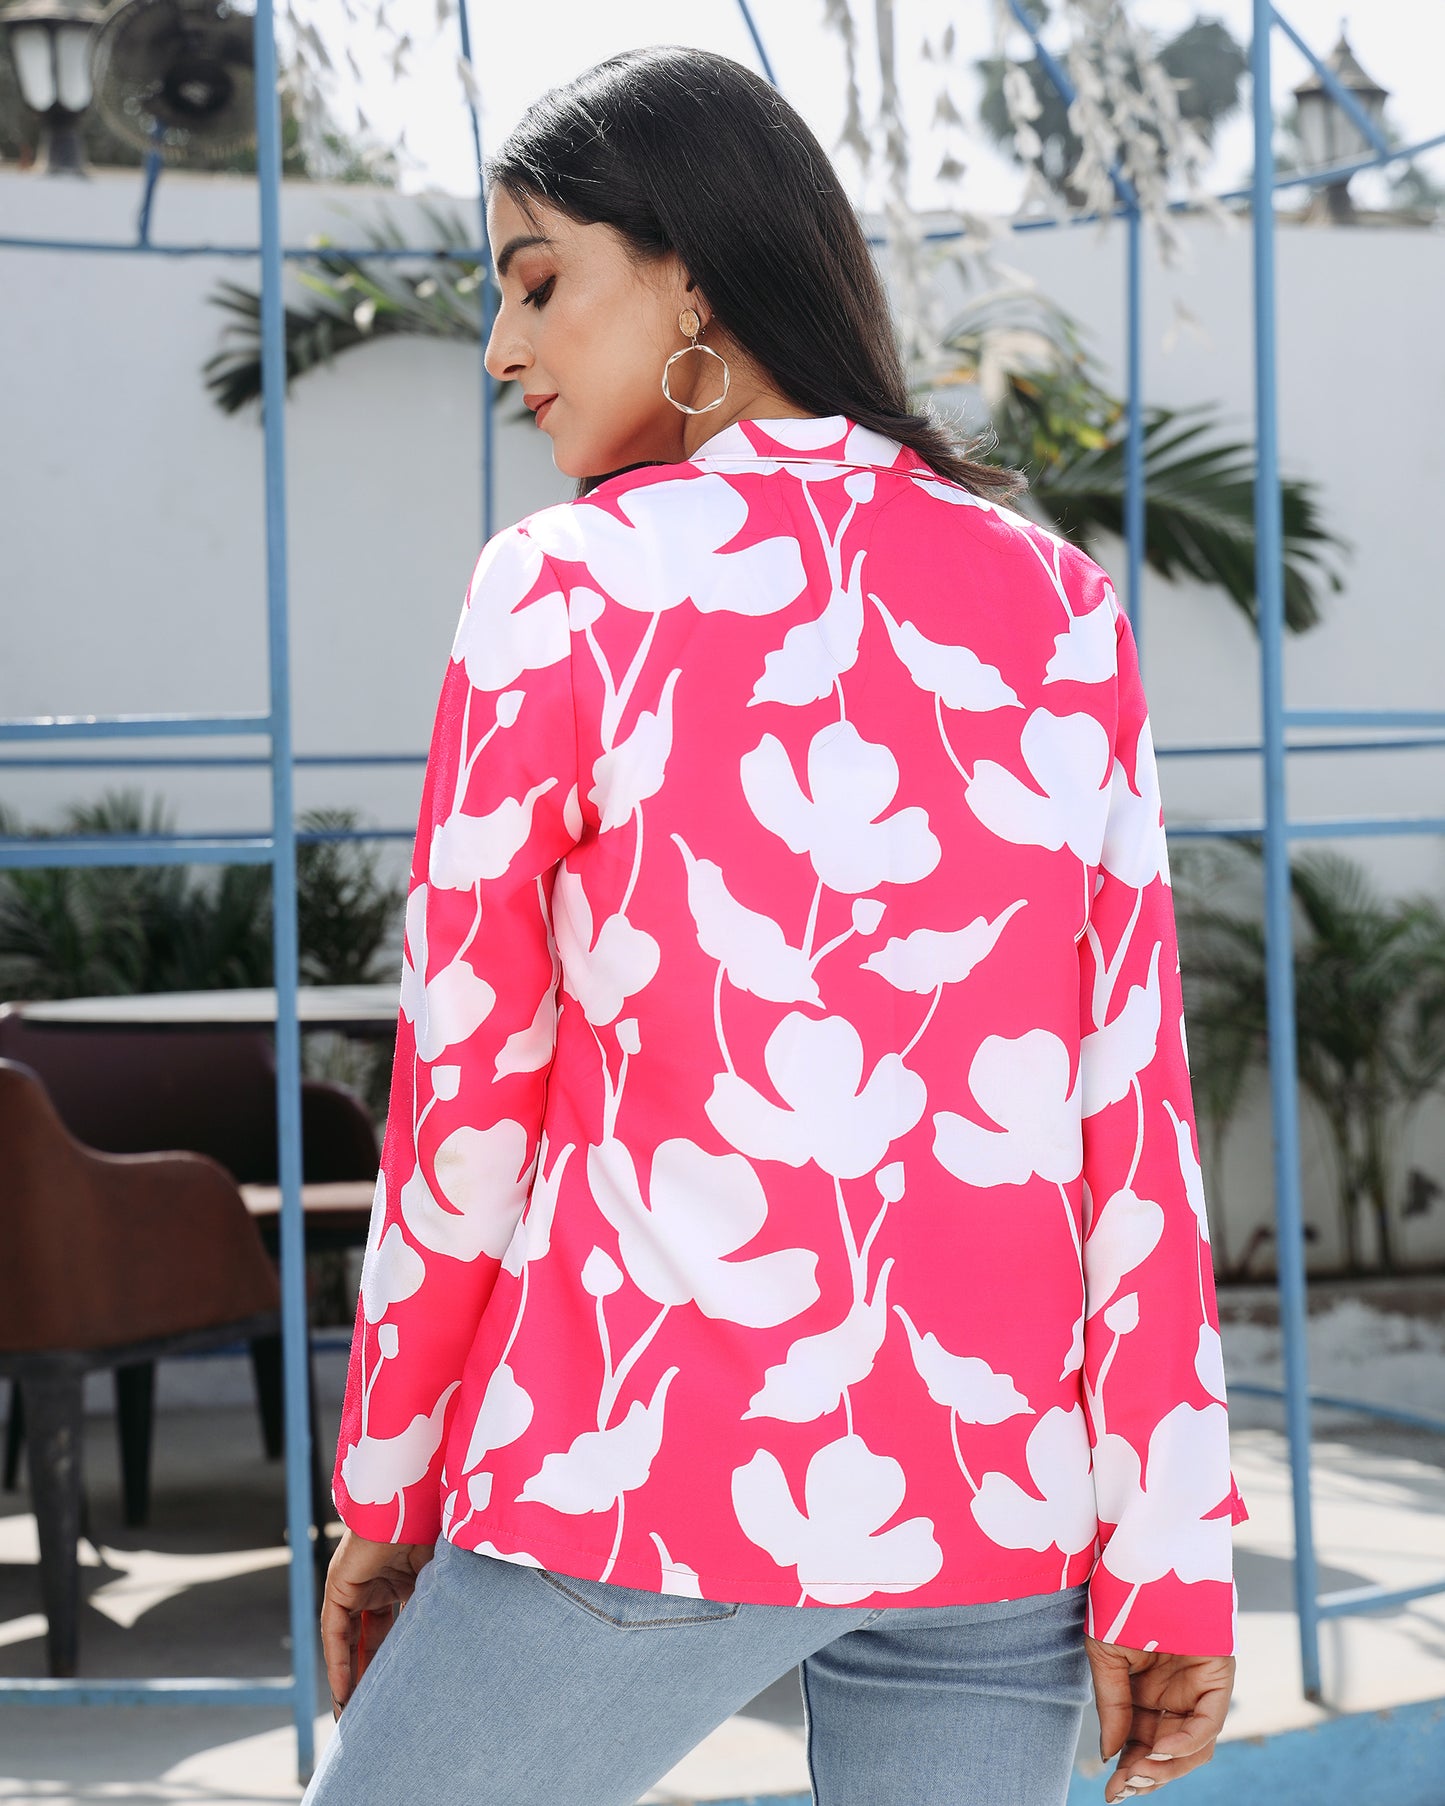 Fun And Light Digital Print Rayon For Your Next Outing